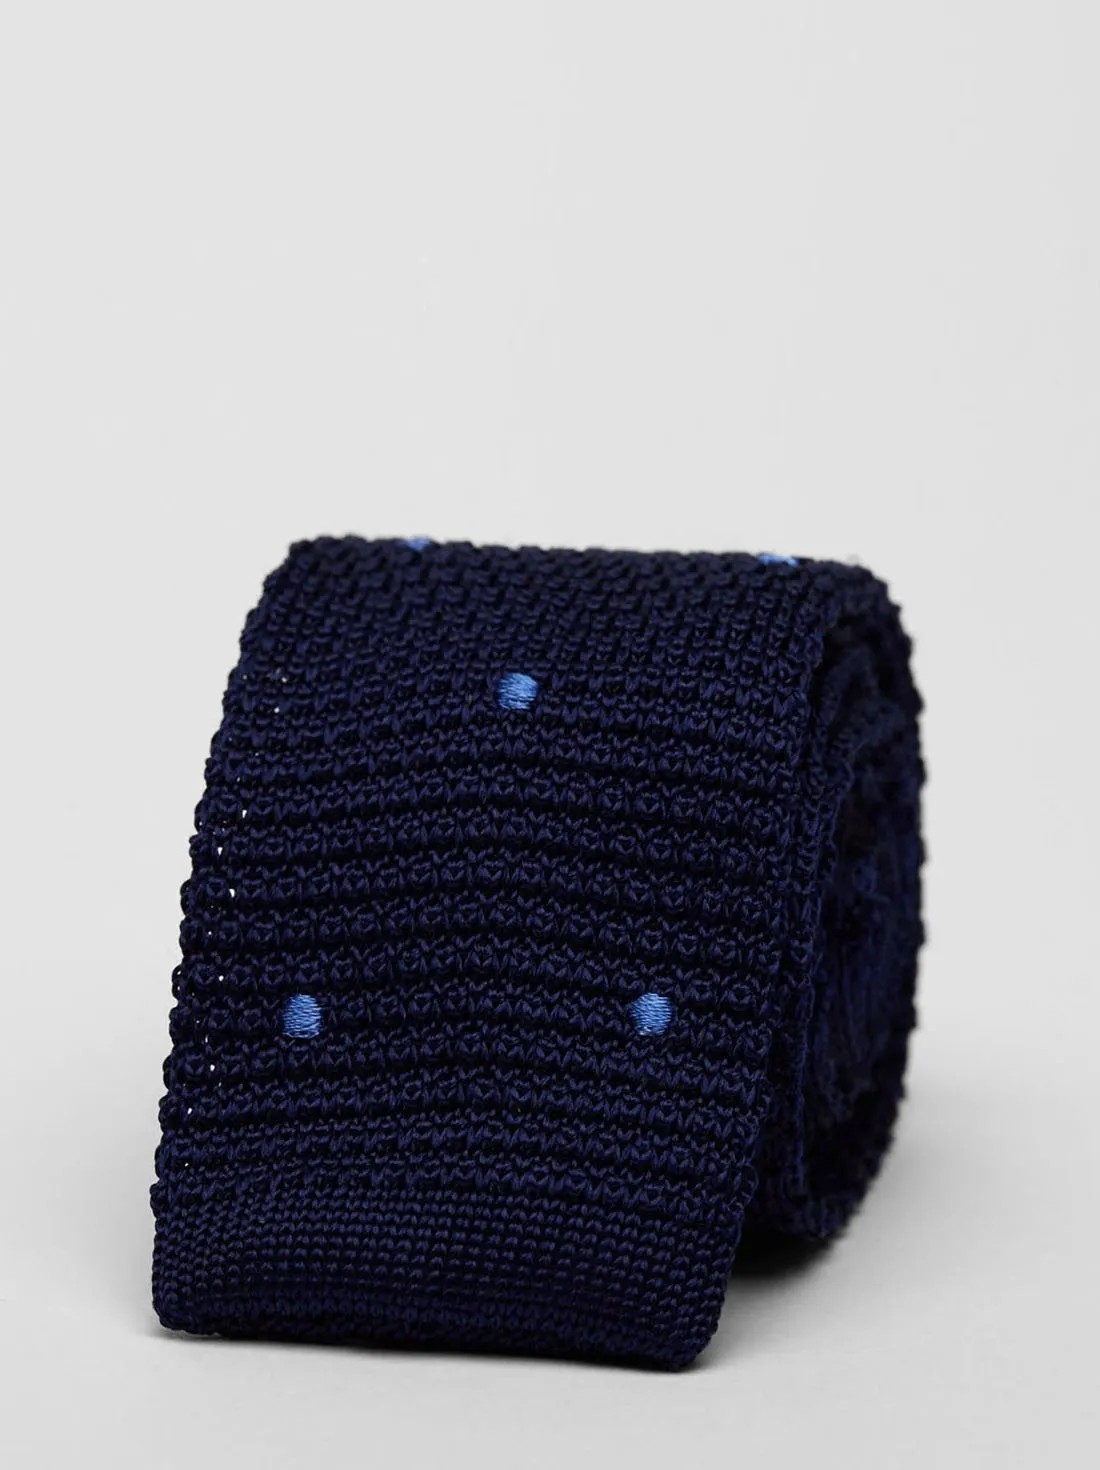 Blue Knitted Tie 